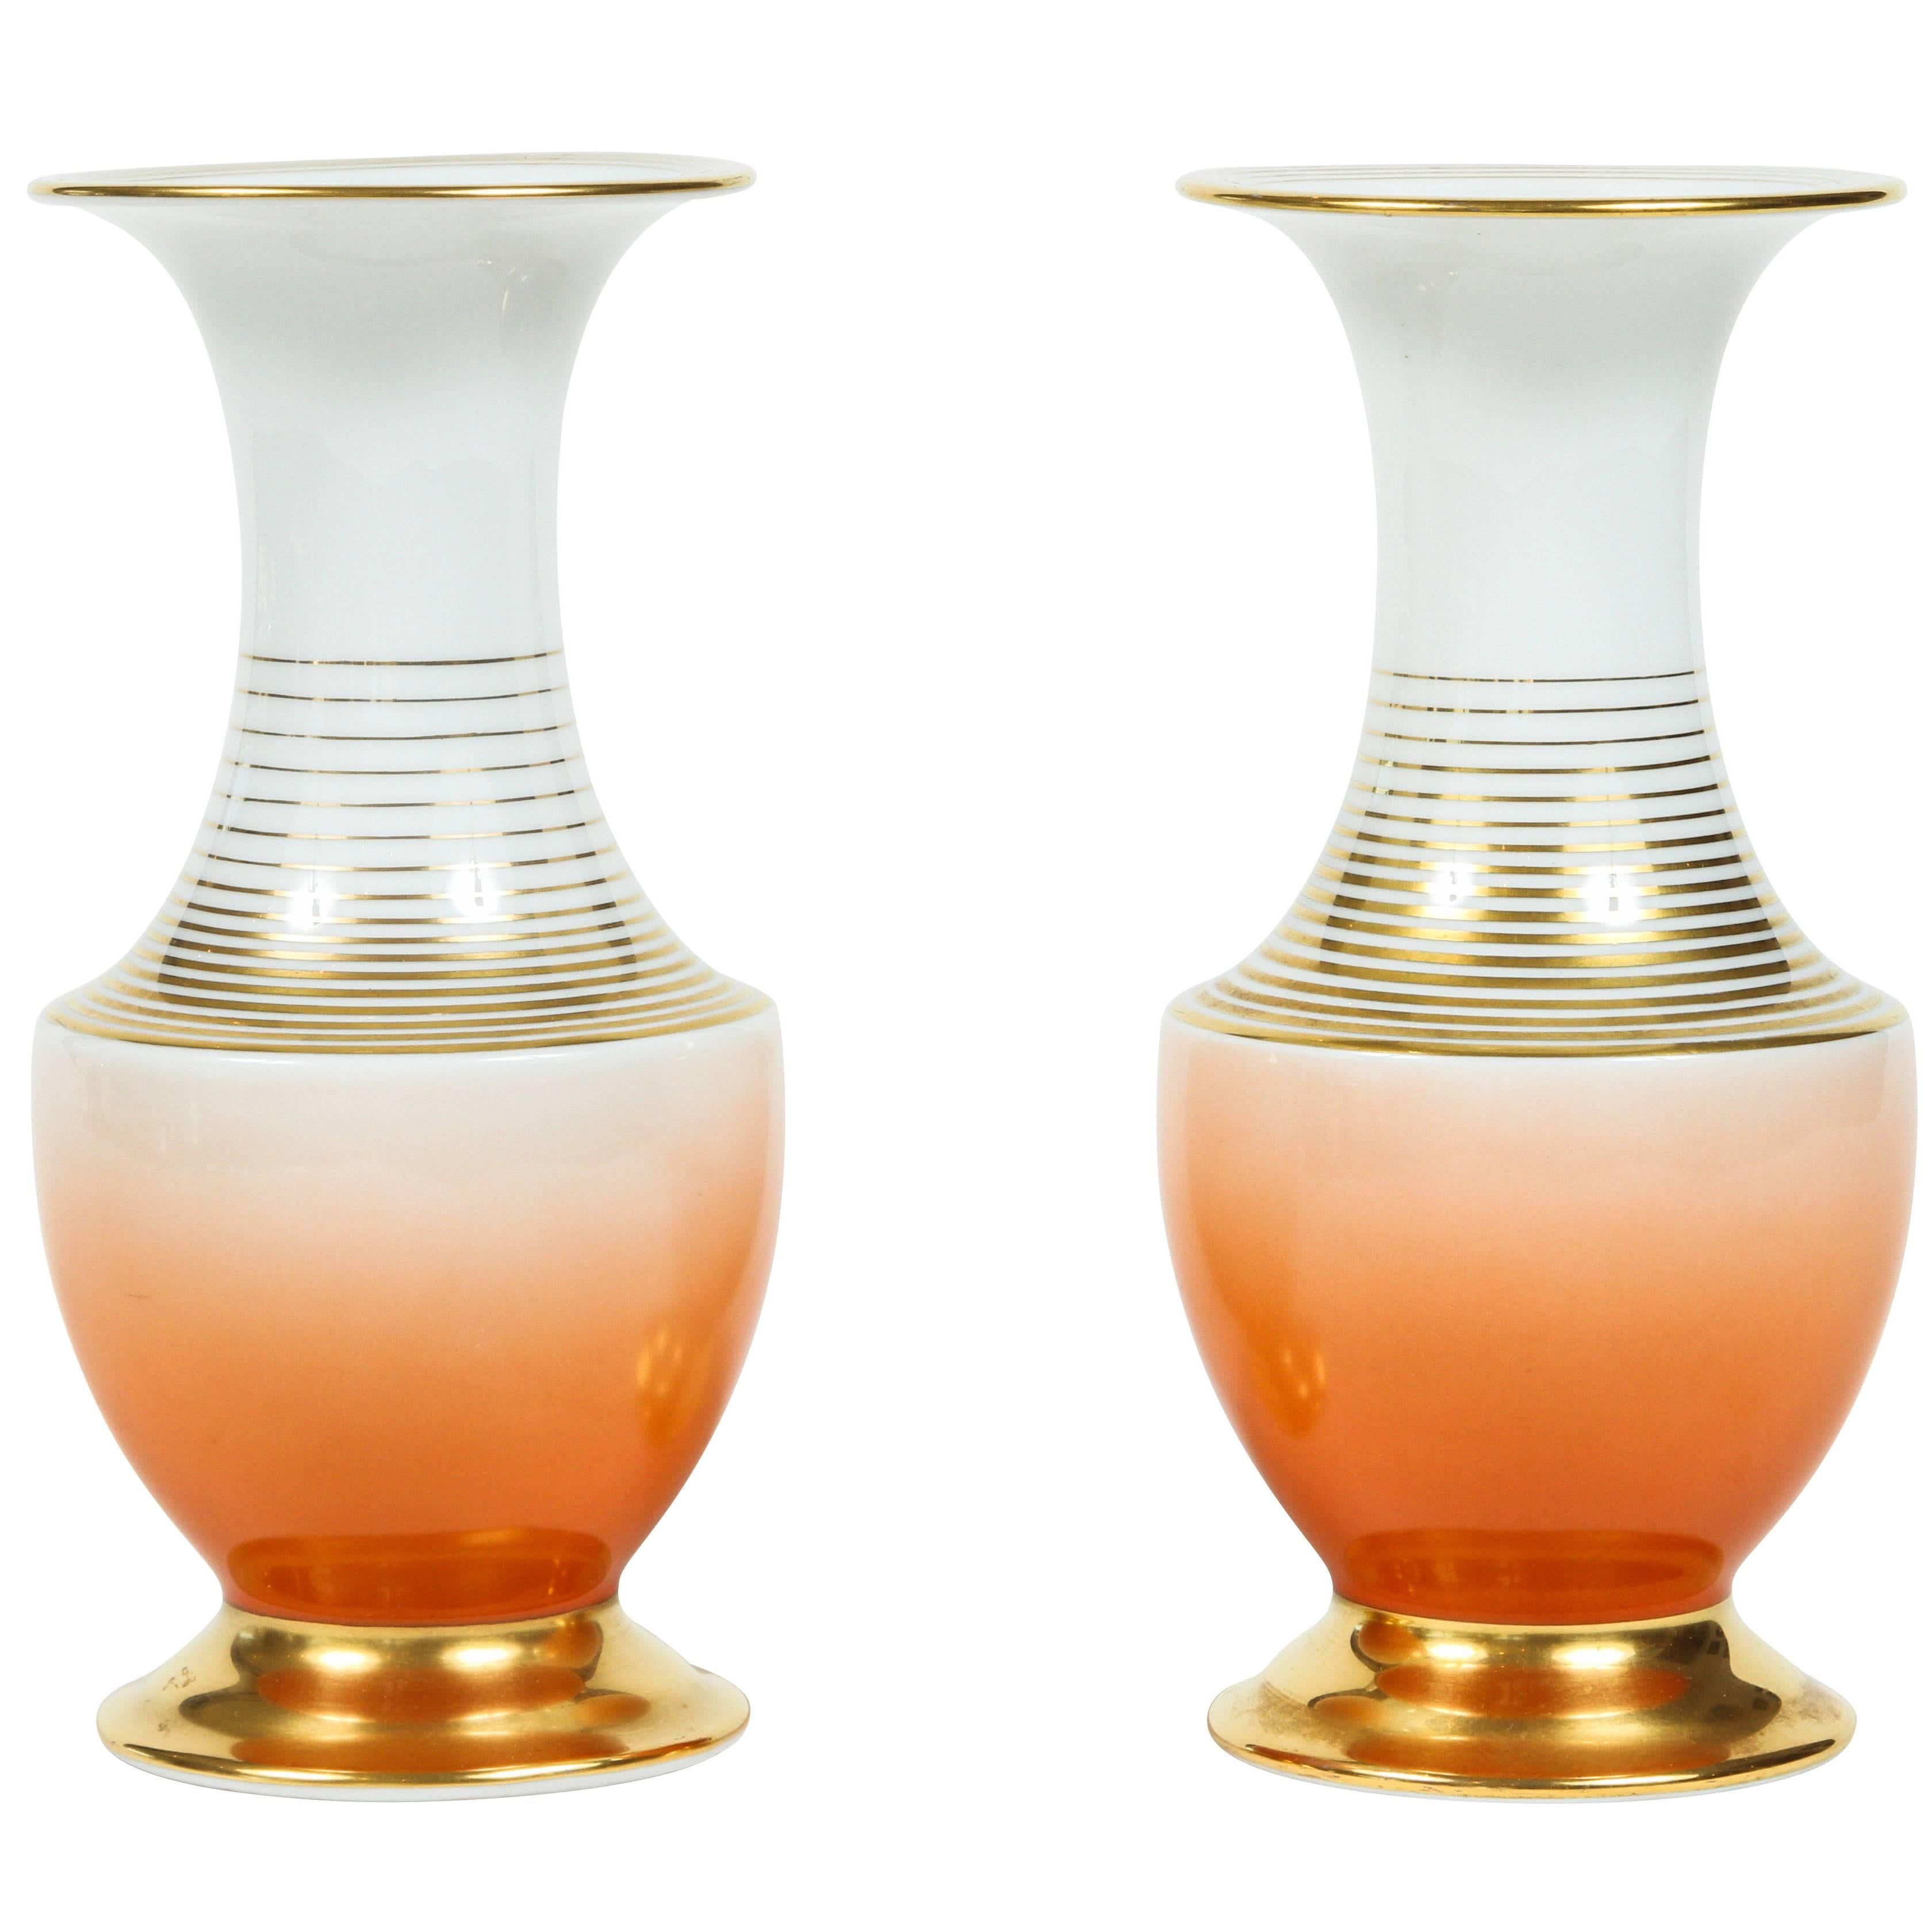 Pair of Small Vases by Rosenthal